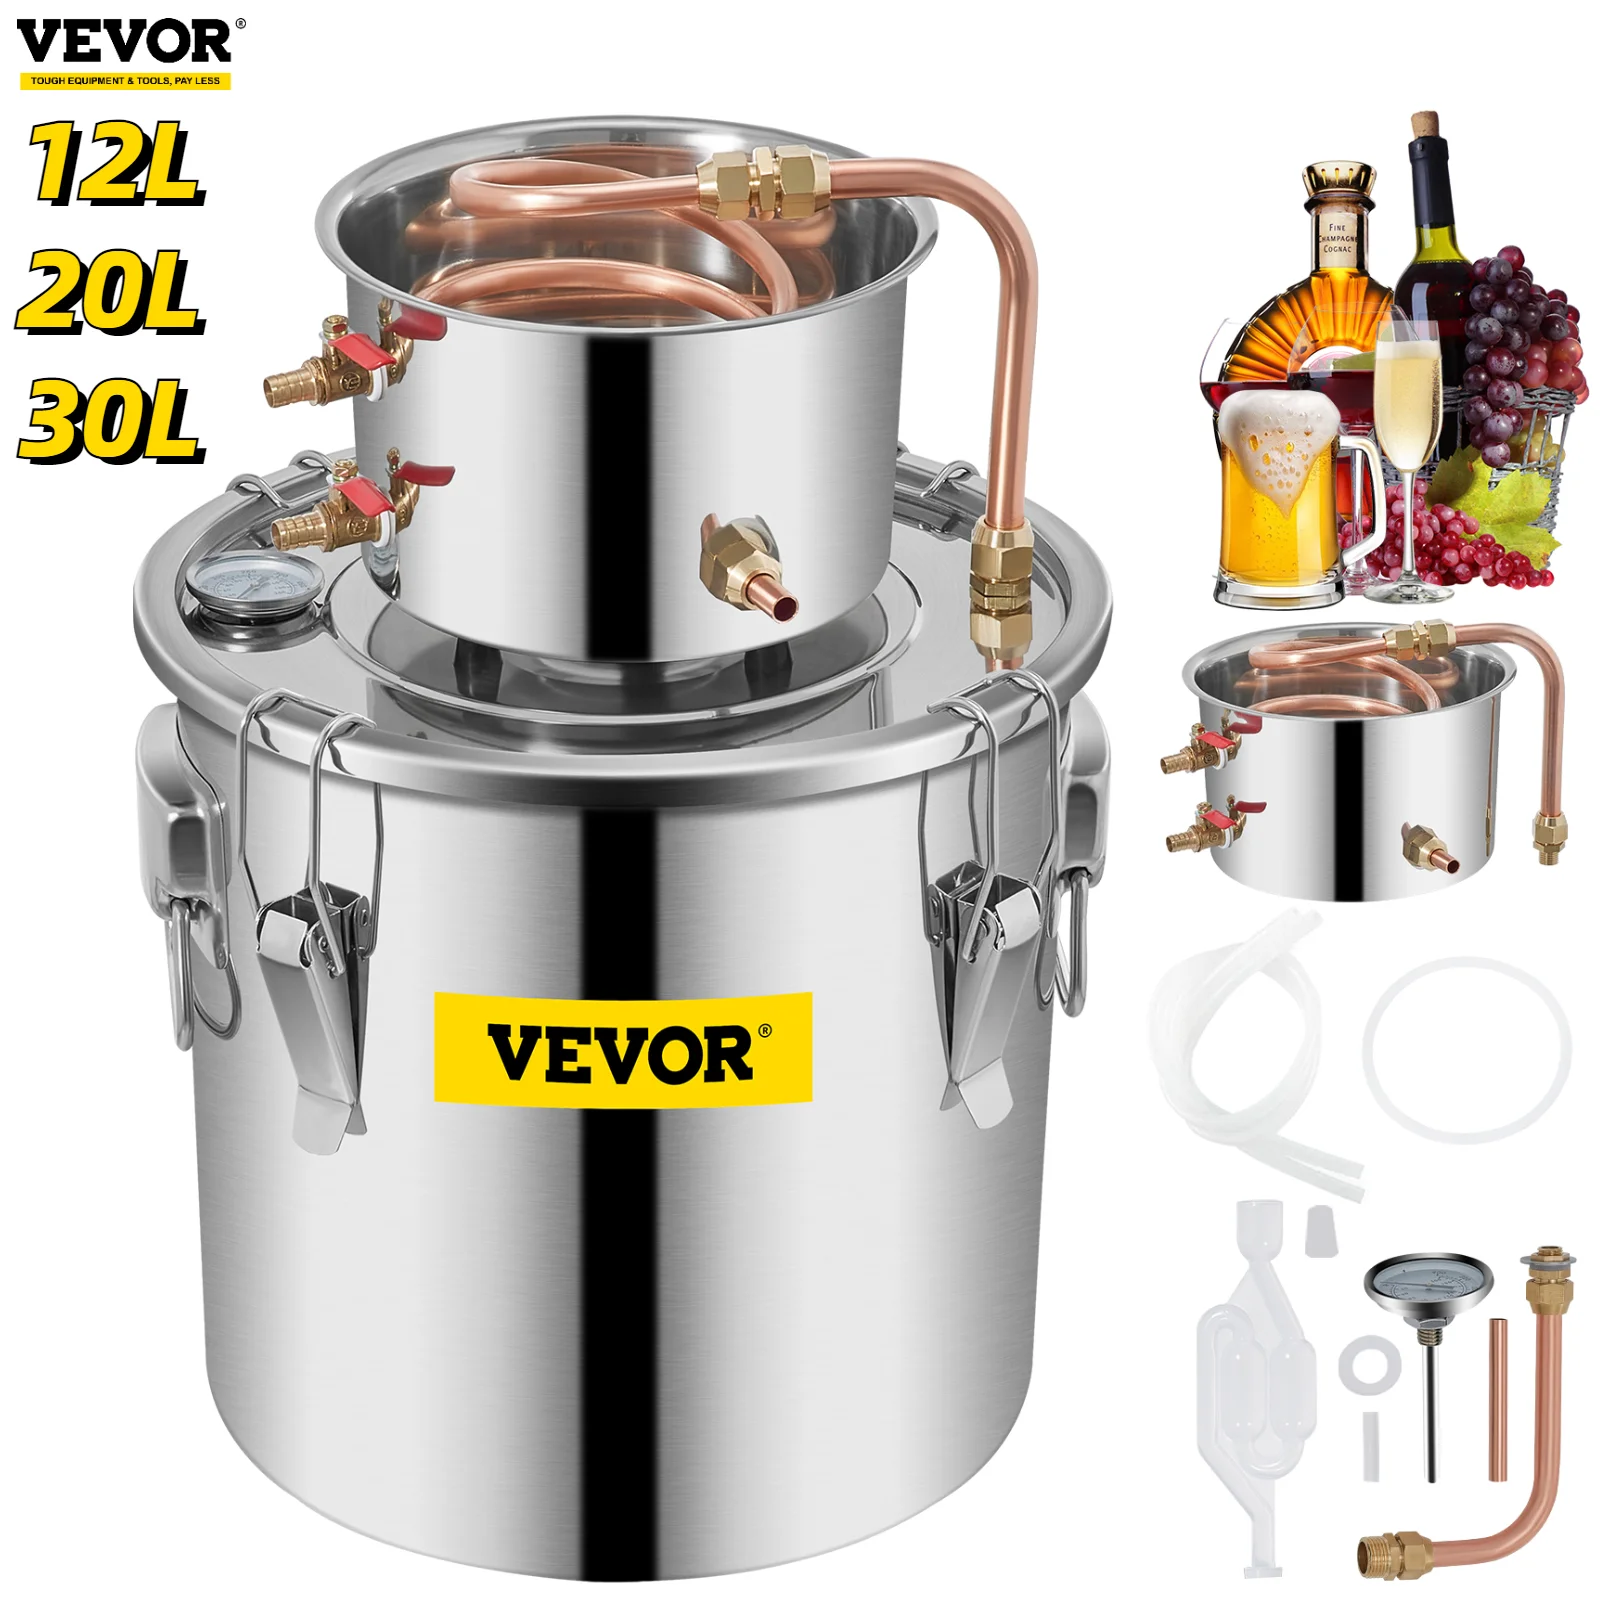 VEVOR 3/5/8 Gal Distiller Alambic Moonshine Alcohol Still Stainless Copper DIY Home Brew Water Wine Essential Oil Brewing Kit